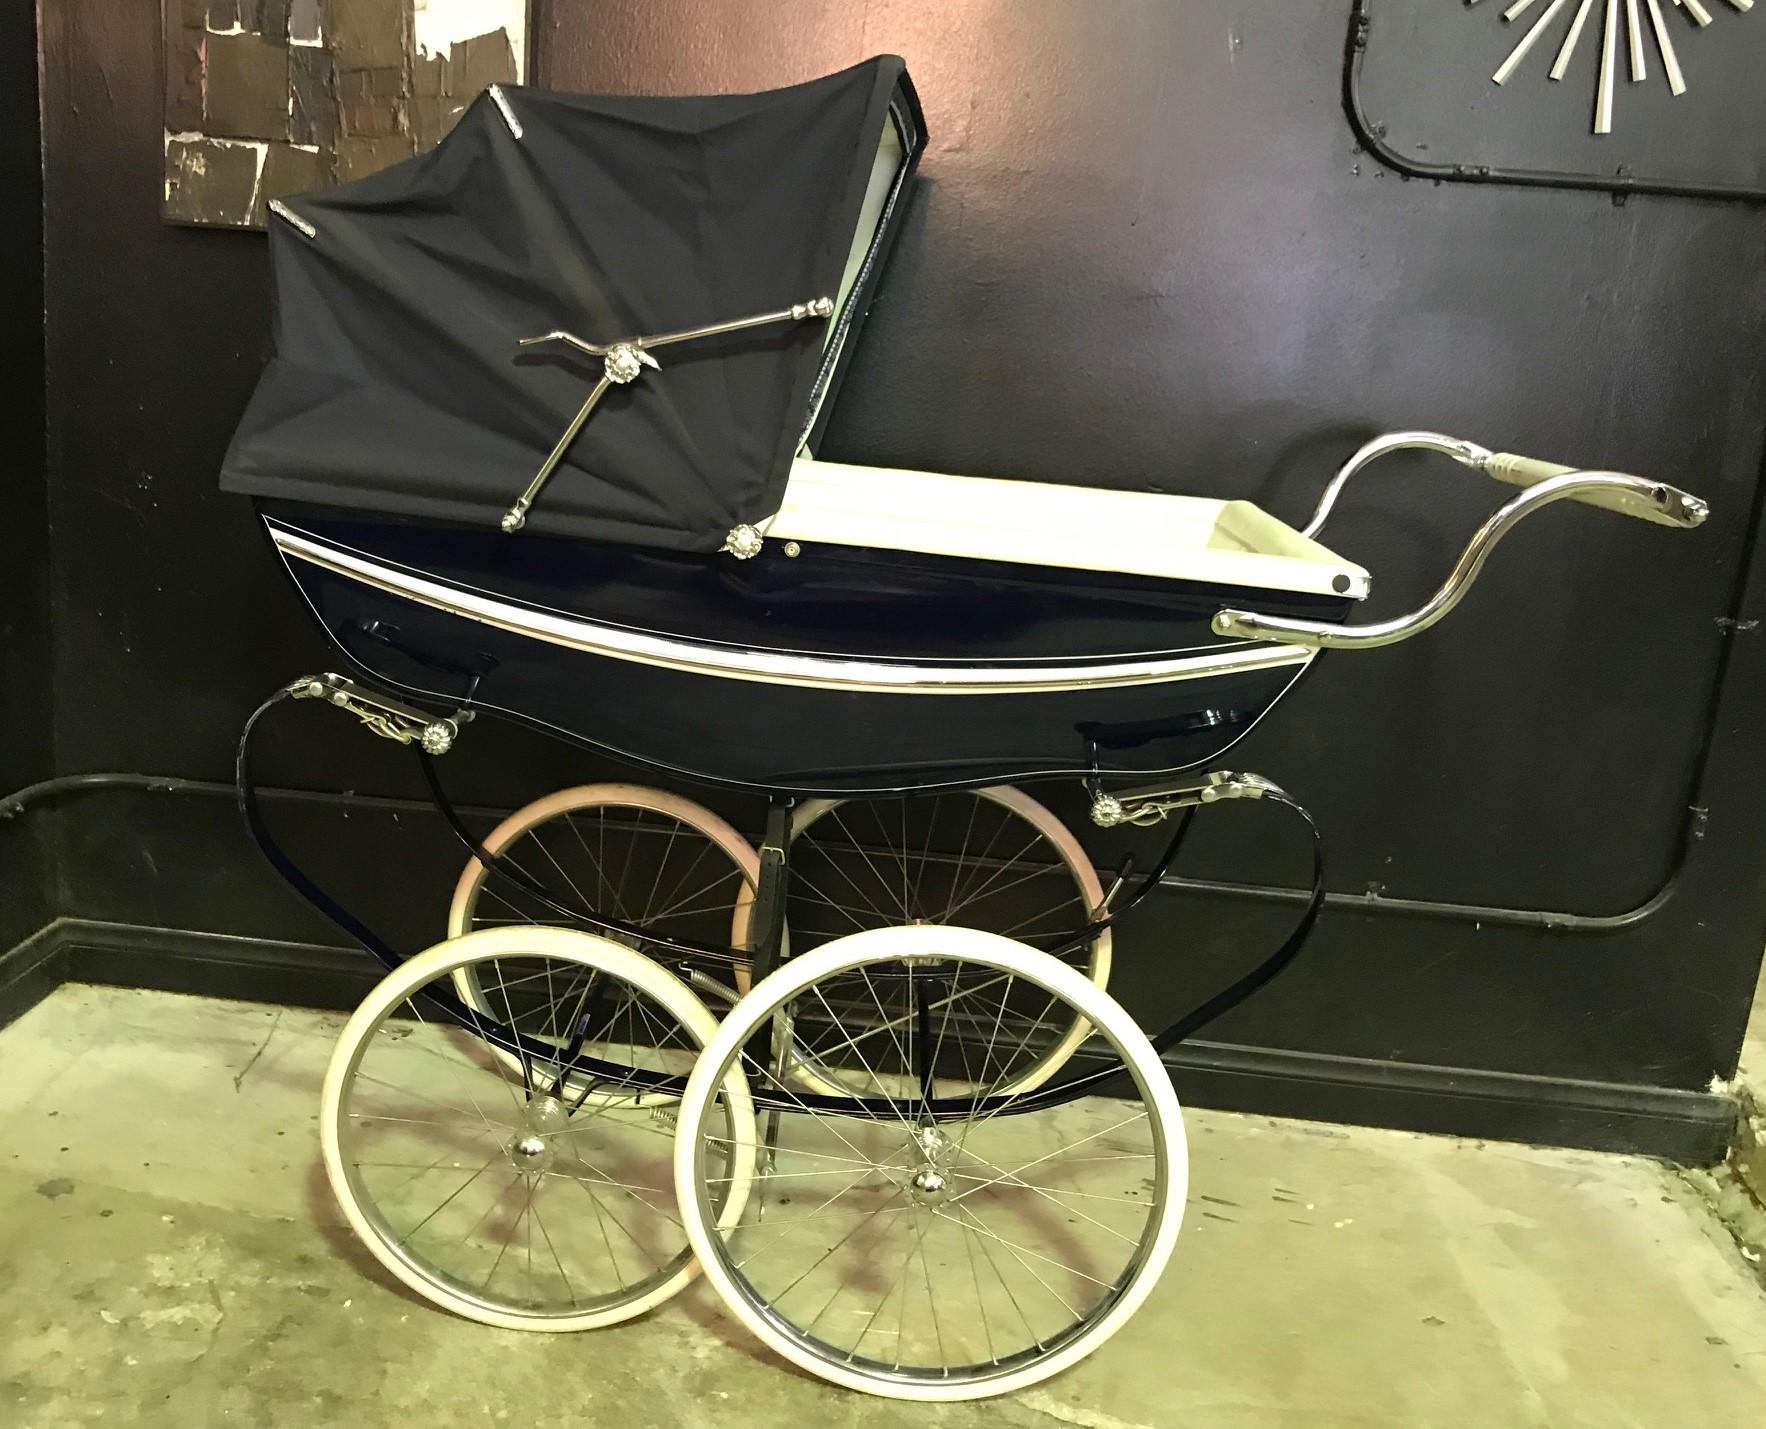 The ultimate luxury in baby carriage prams. The silver cross Balmoral pram is handcrafted in the original Silver Cross factory in Yorkshire, England. This exquisite carriage is handmade, finely detailed, handstitched, and hand polished. The finished